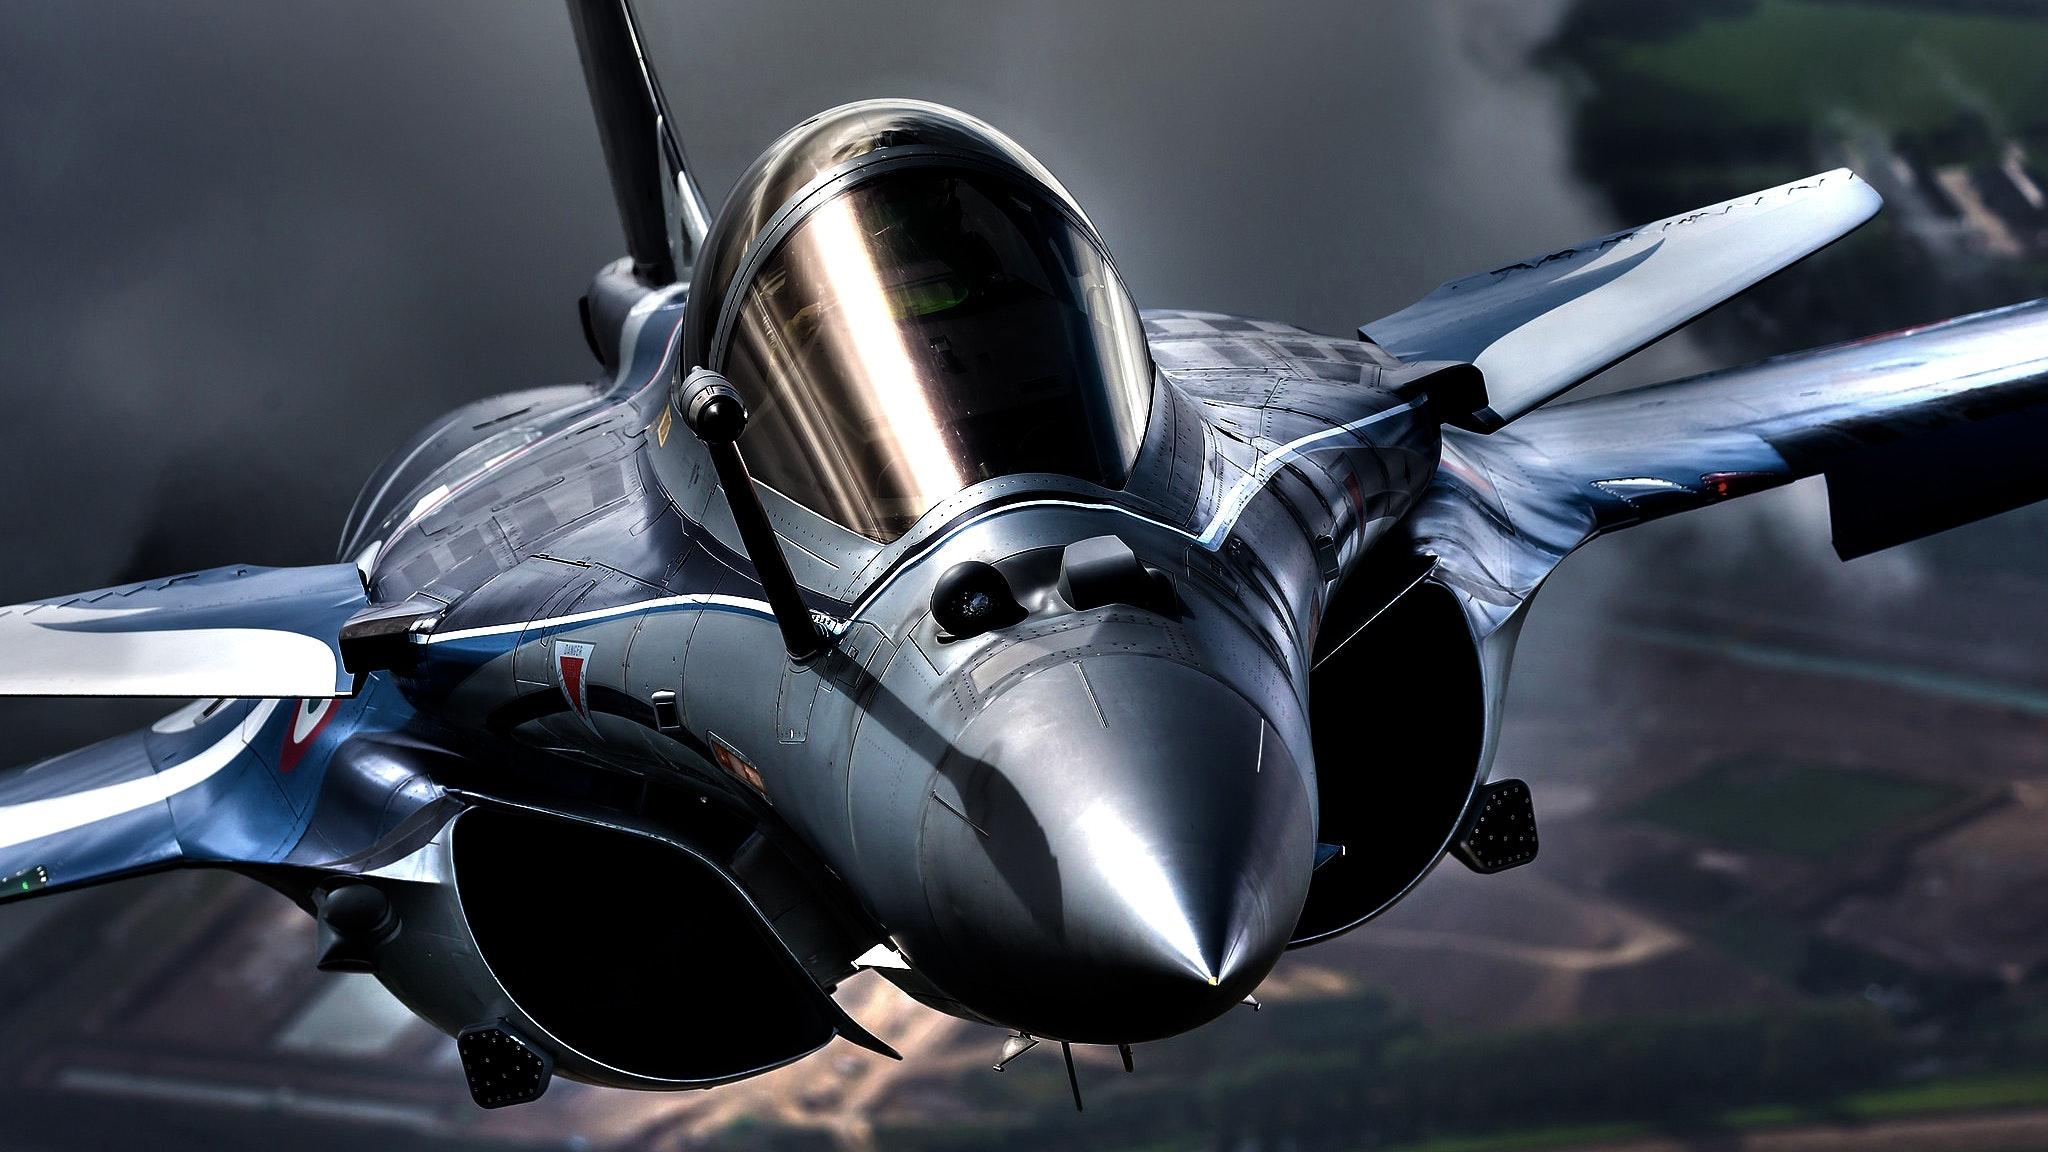 Rafale Fighter Plane Wallpapers - Wallpaper Cave